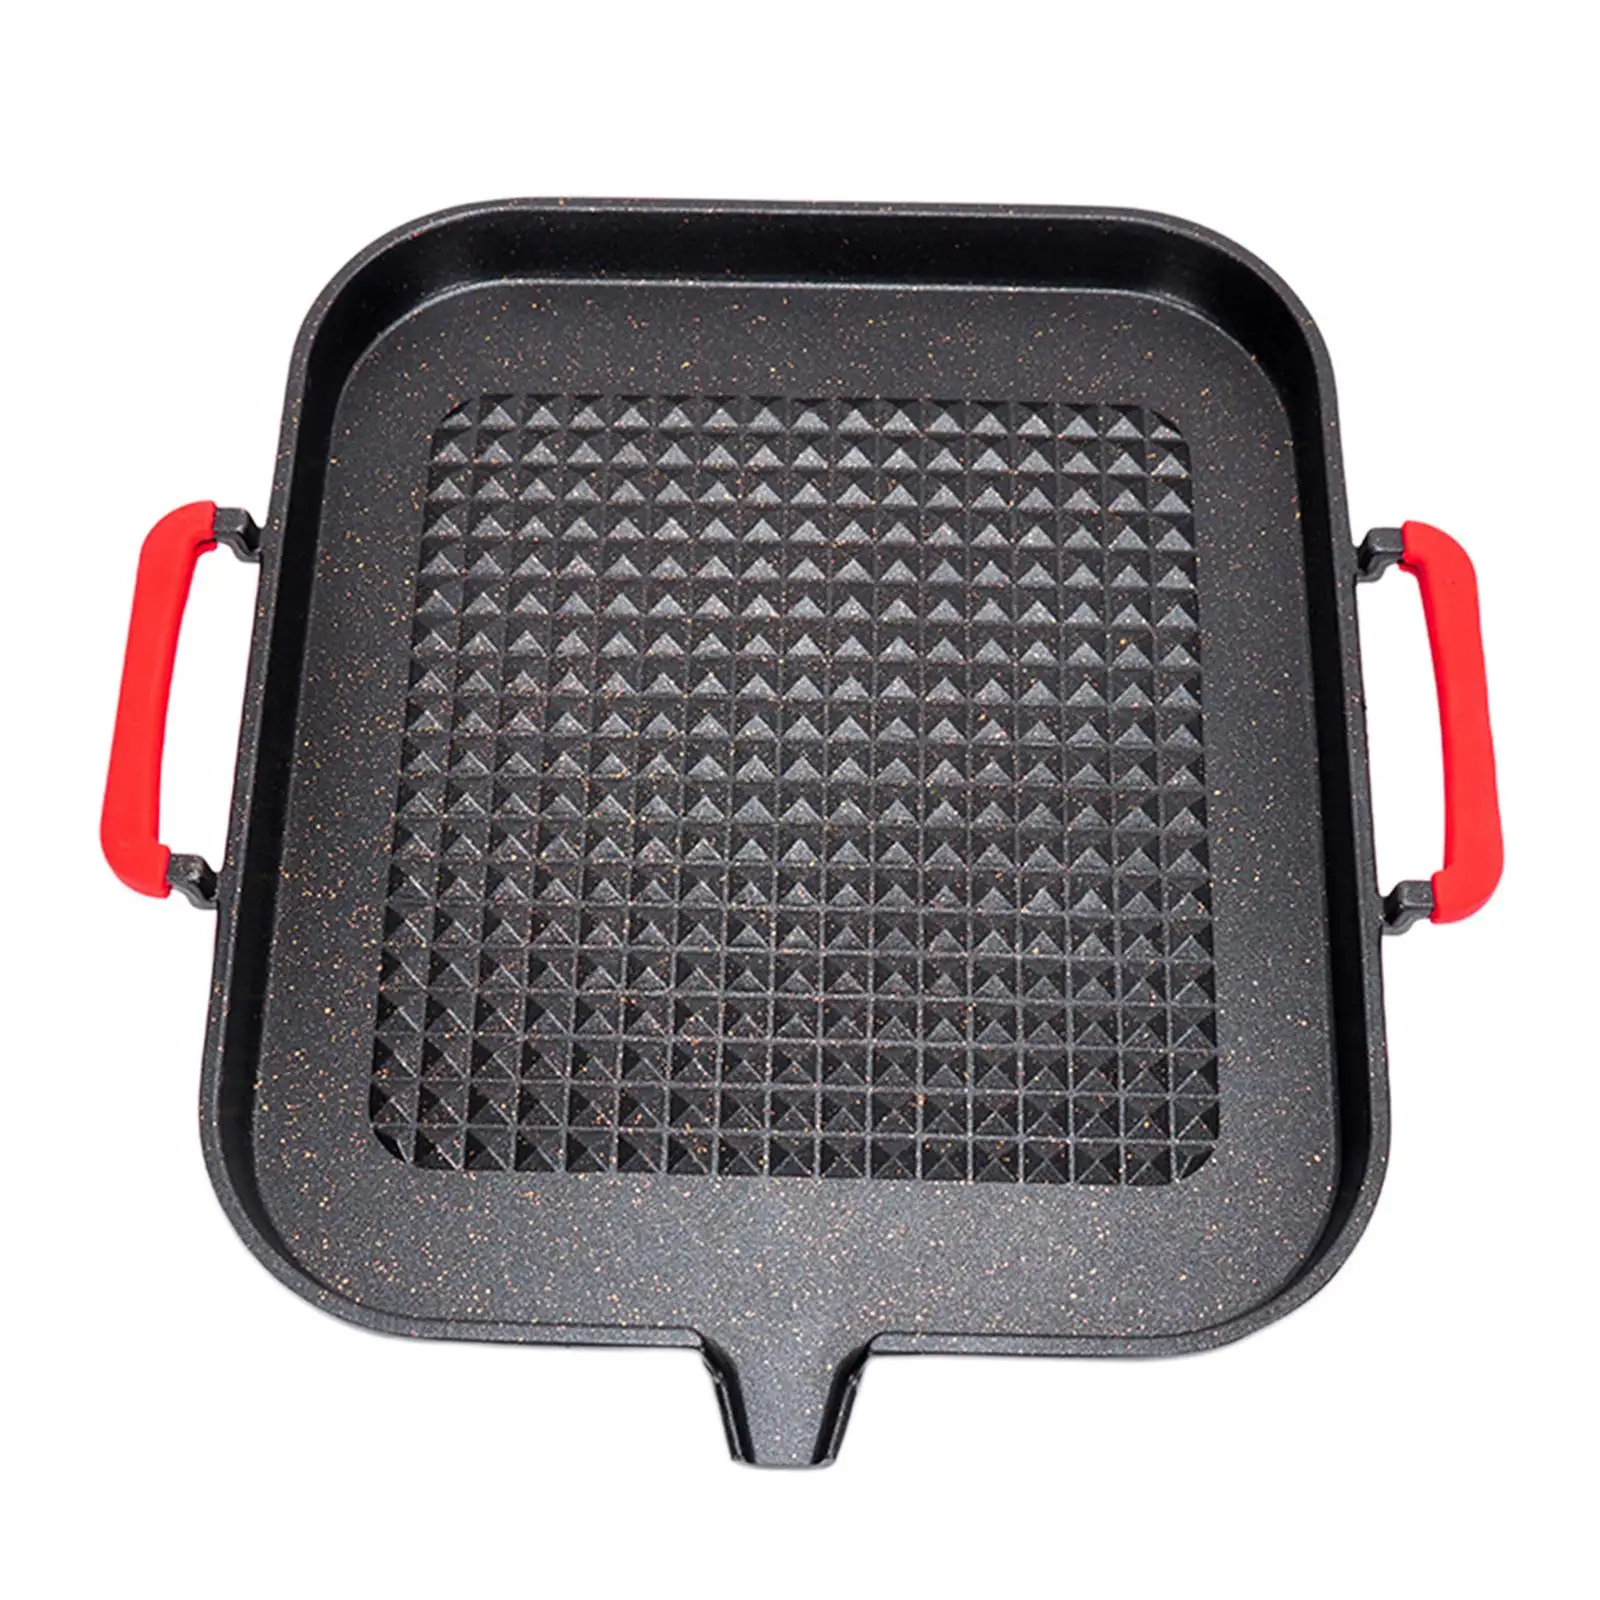 Grill Pan Portable Skillet Cookware Grilling BBQ Picnic Camping Griddle Tray